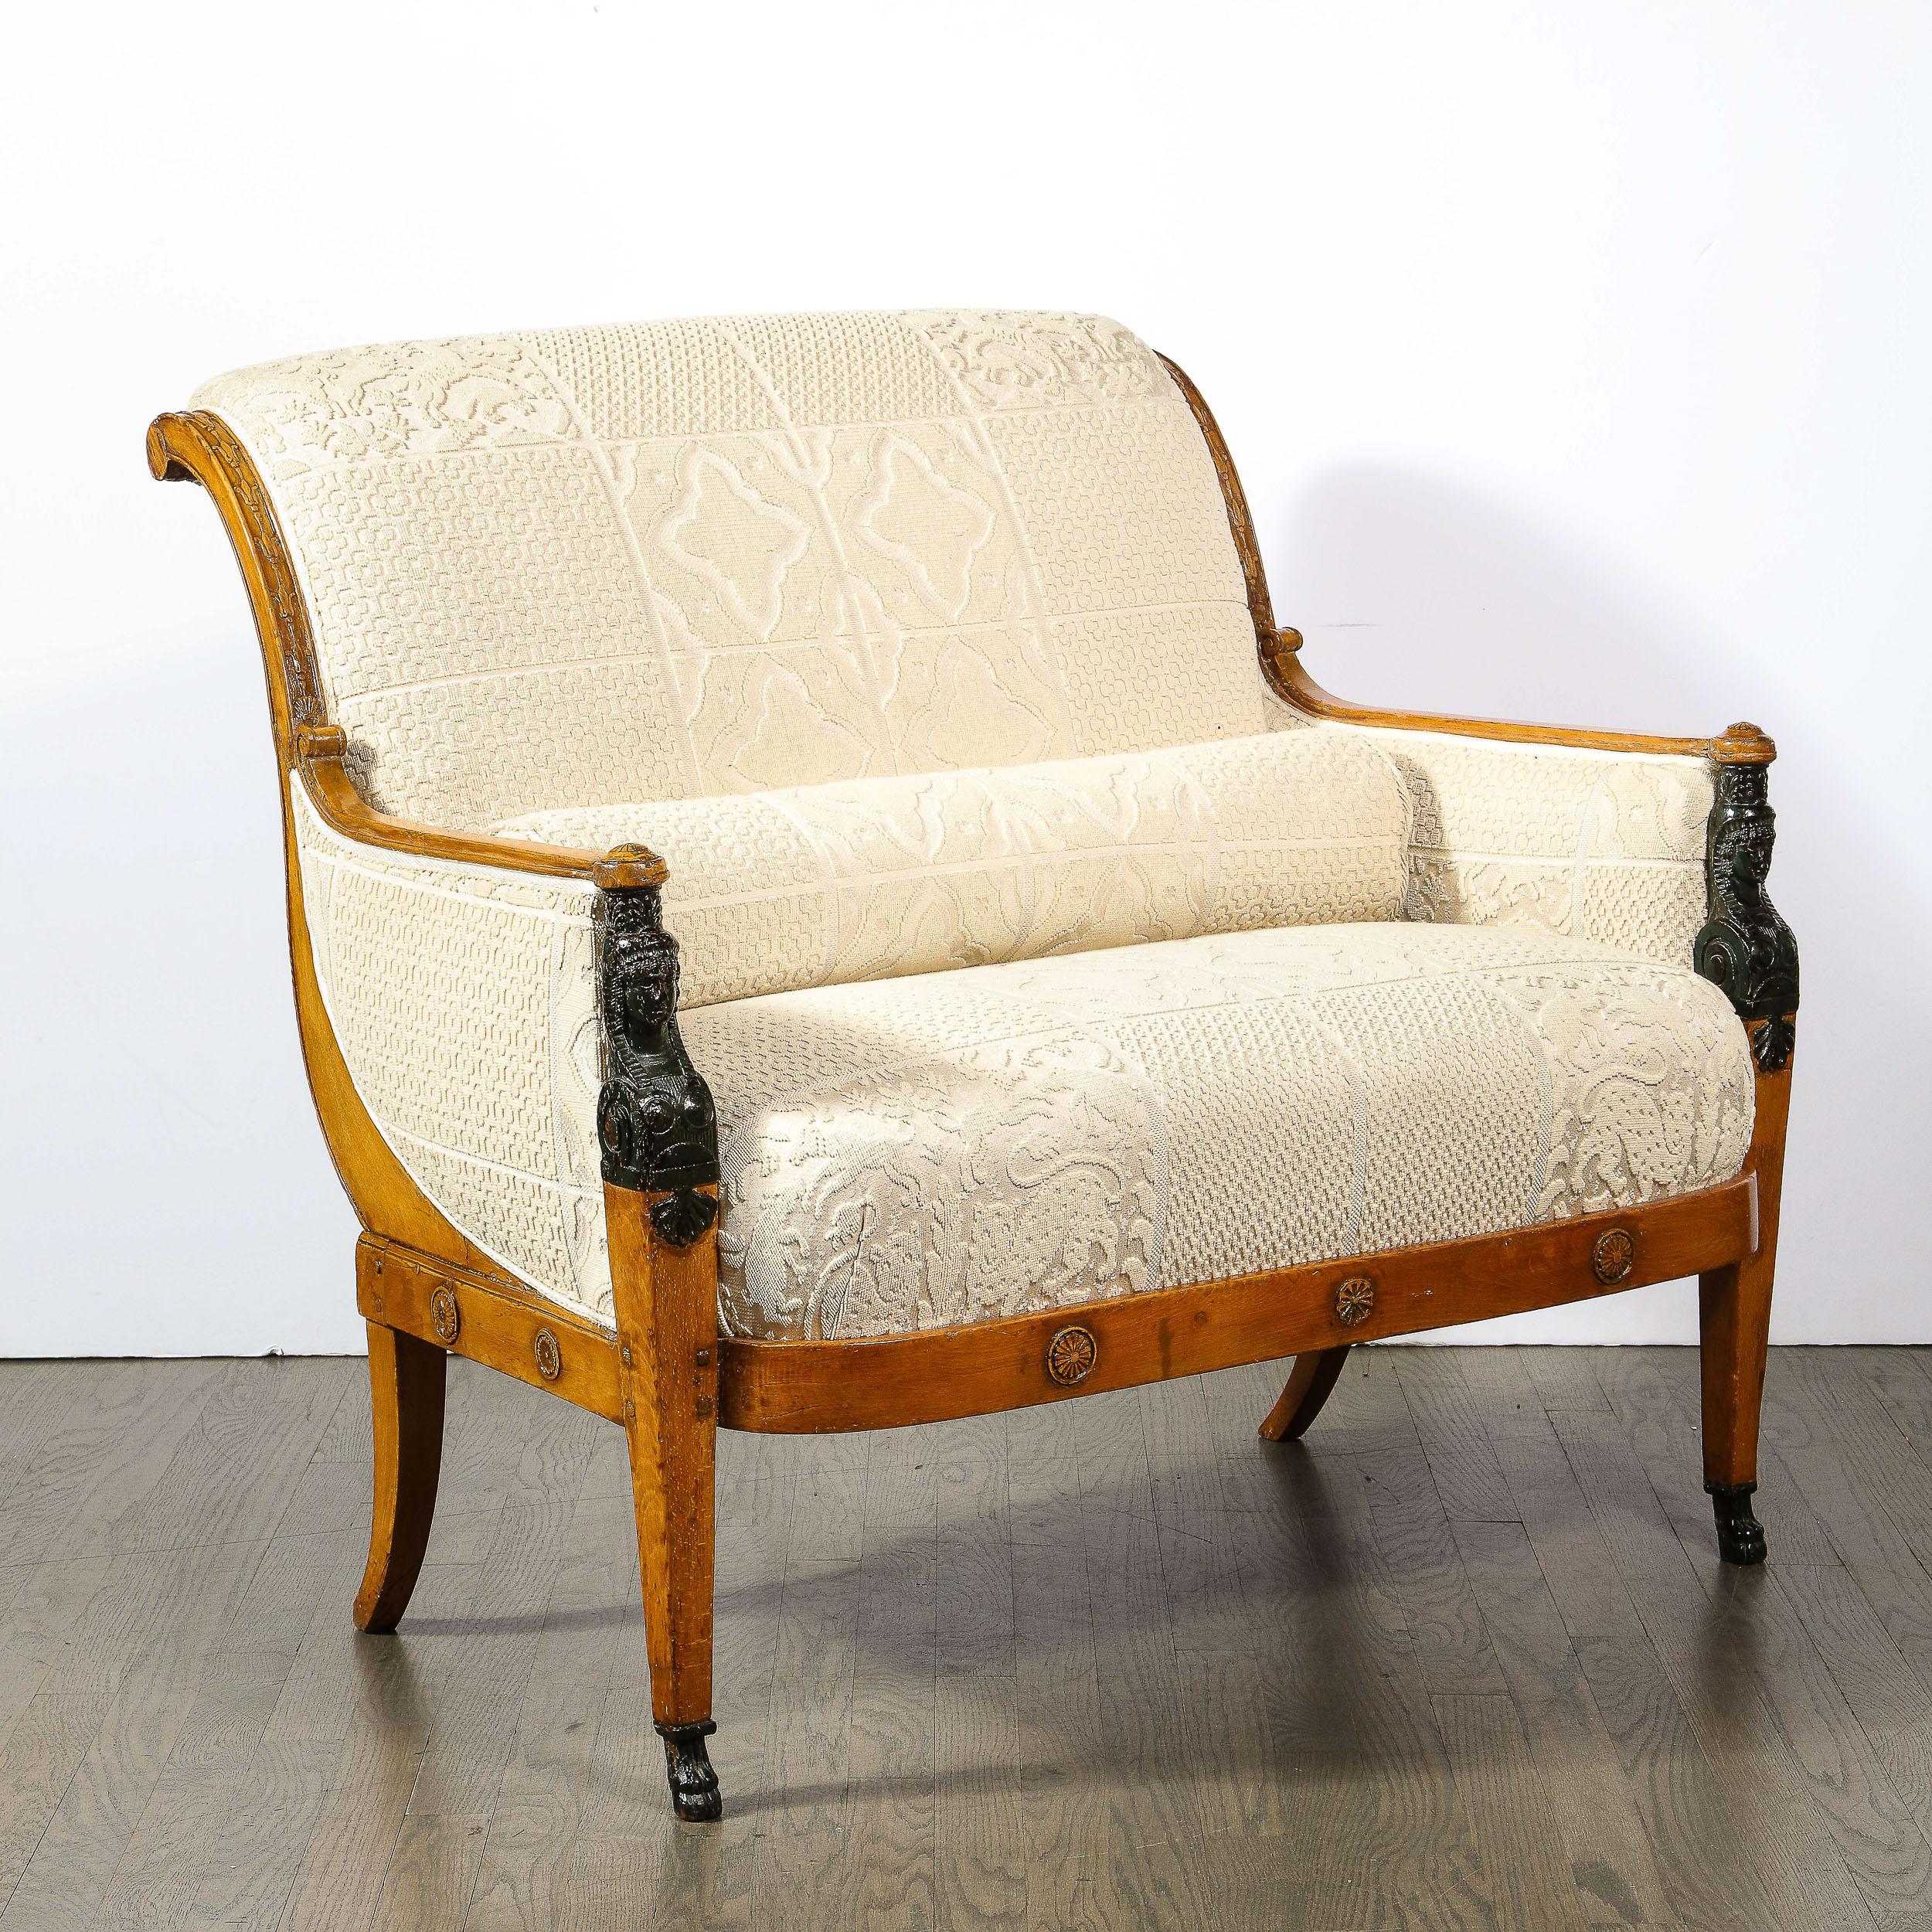 Biedermeier Neoclassical Settee with Scroll Form Back & Saber Leg Supports  For Sale 11